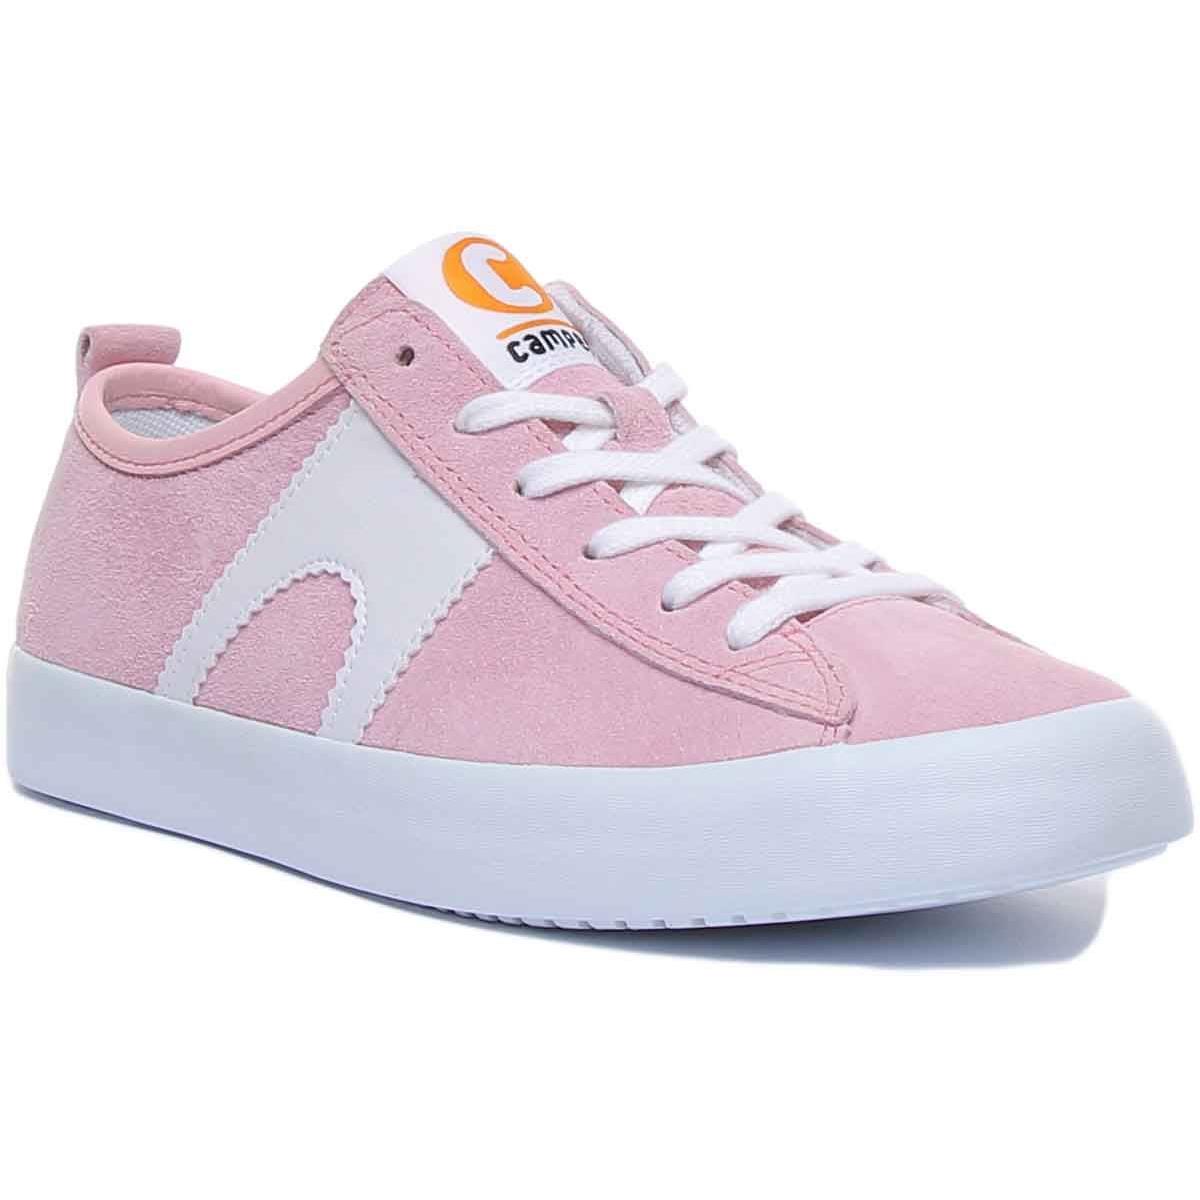 Camper Imar Copa Lace Up Casual Summer Sneaker In Pink Size US 5 - 10 PINK